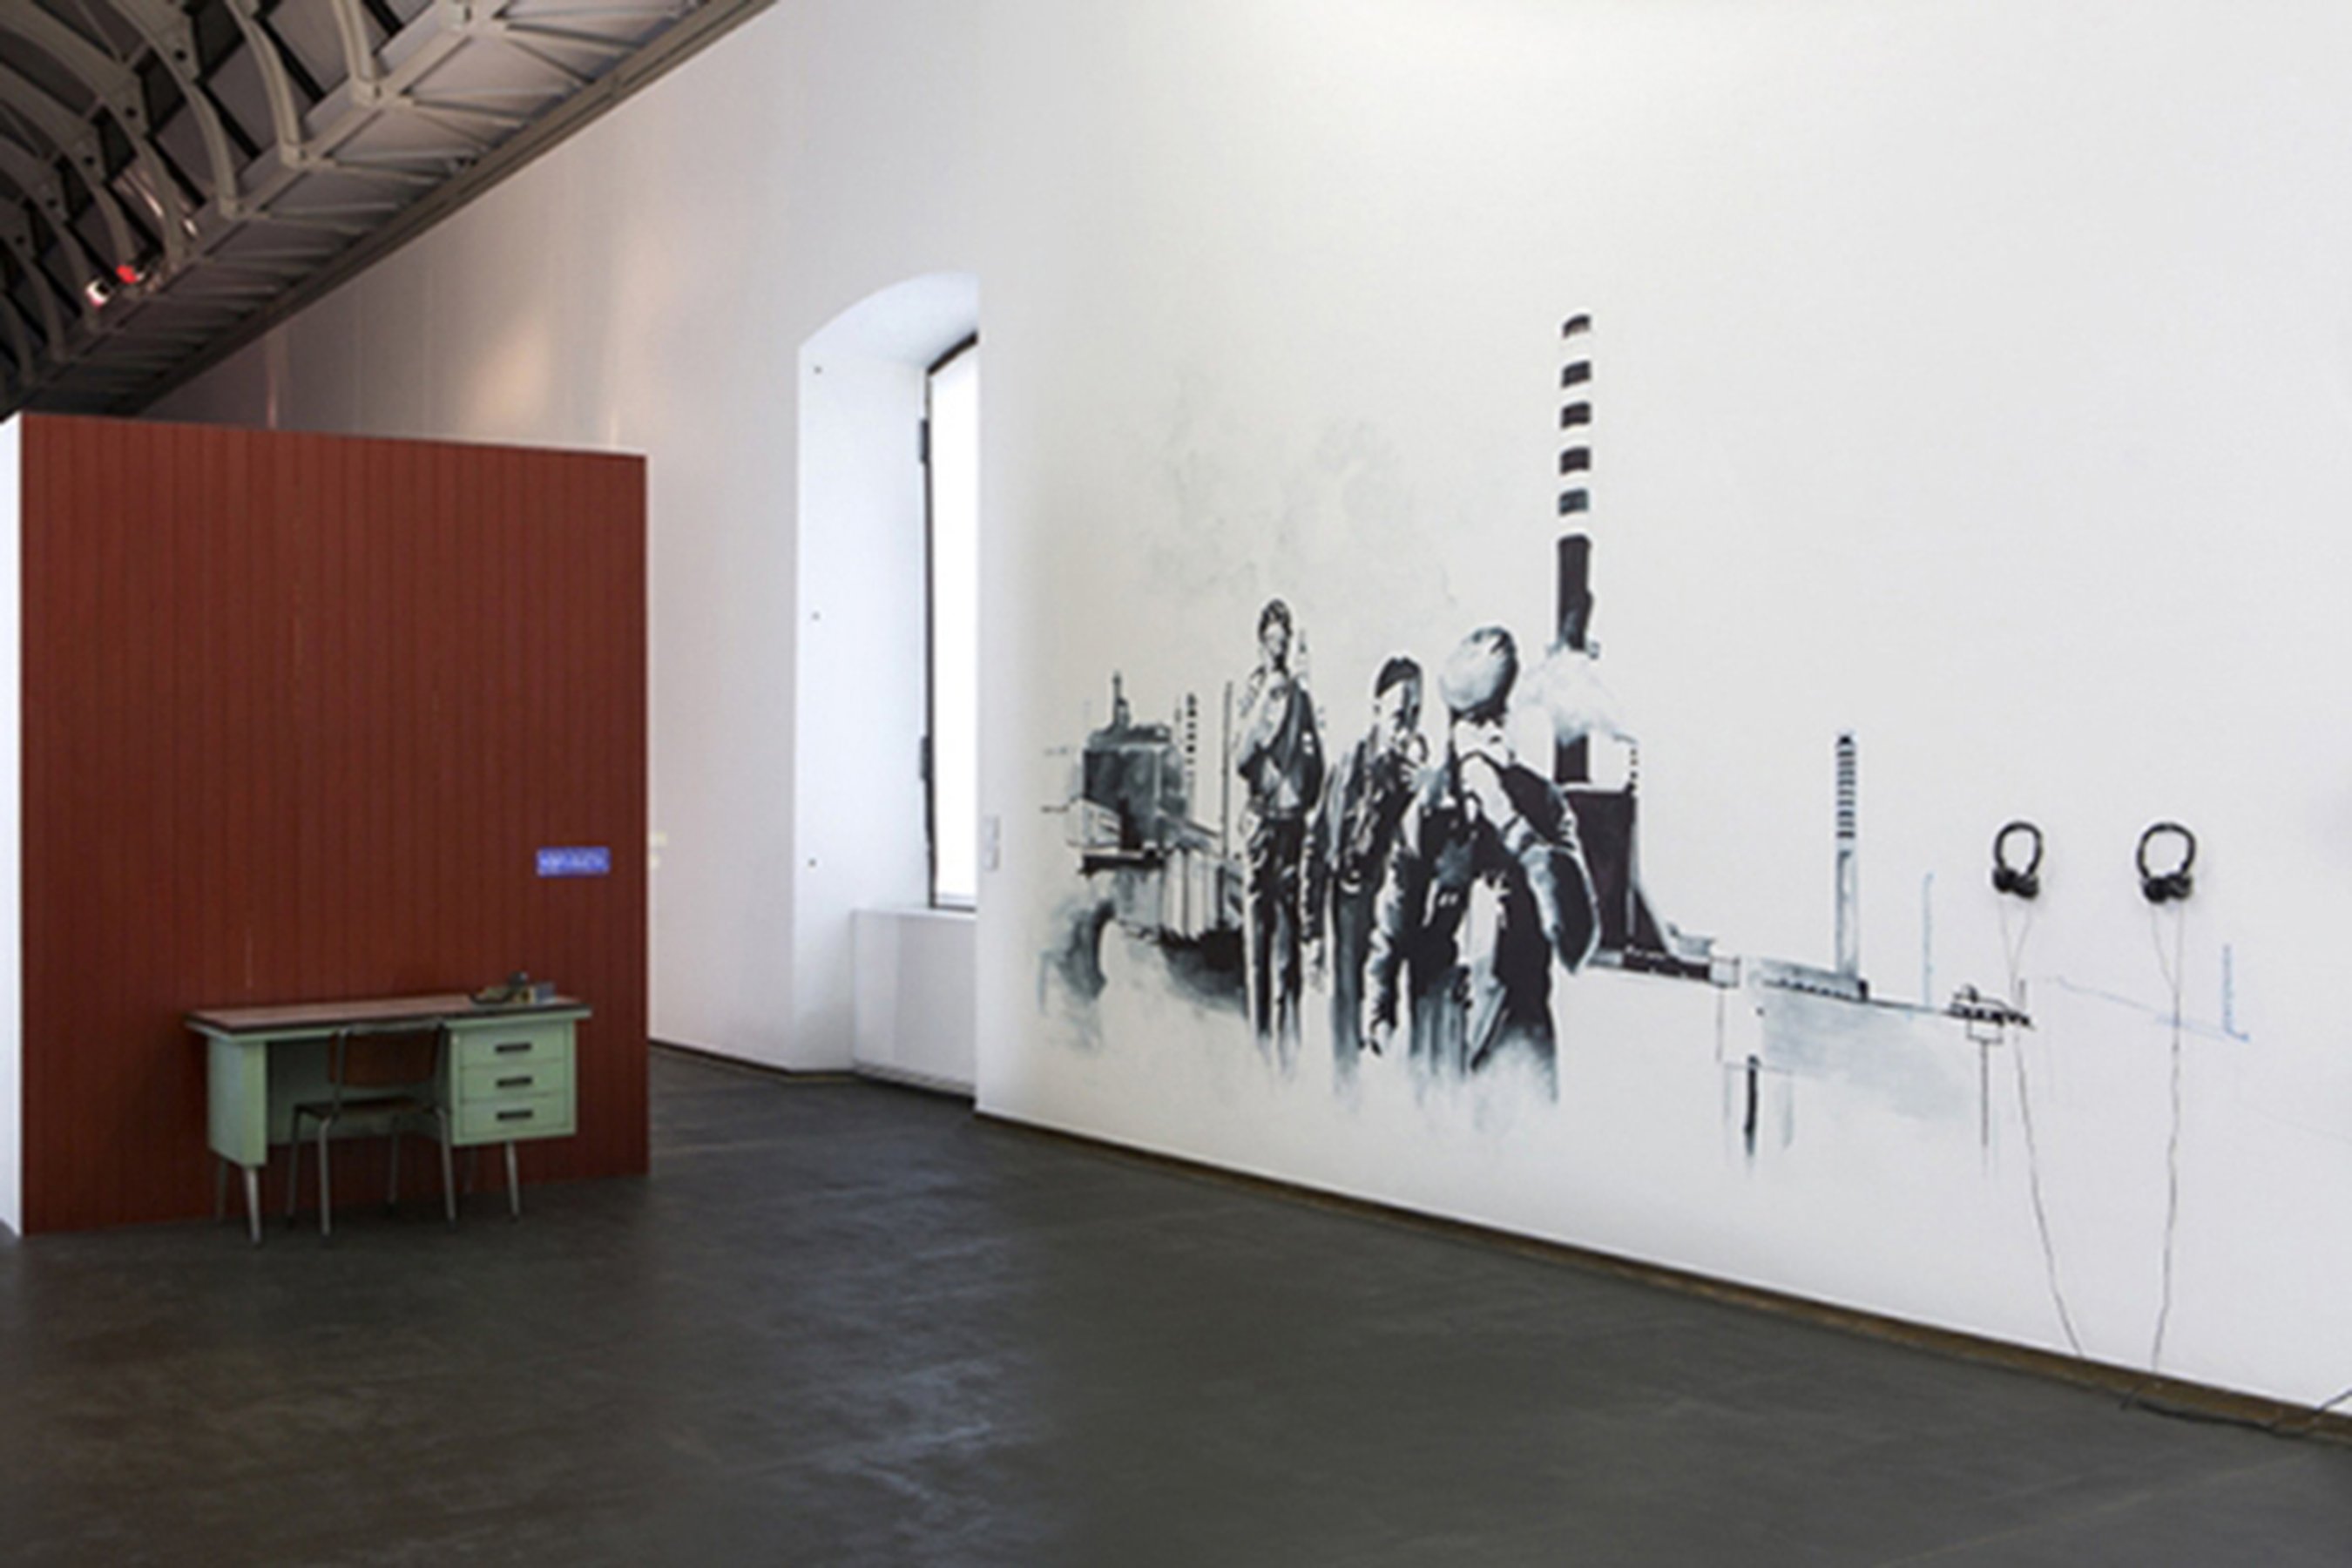 Estman Radio Drama, 2011 Installation: painted wood wall, desk, chair, radio, 4 CD players, 4 headphones Dimensions determinated by the space Installation view at Castello di Rivoli, Italy Photo Renato Ghiazza